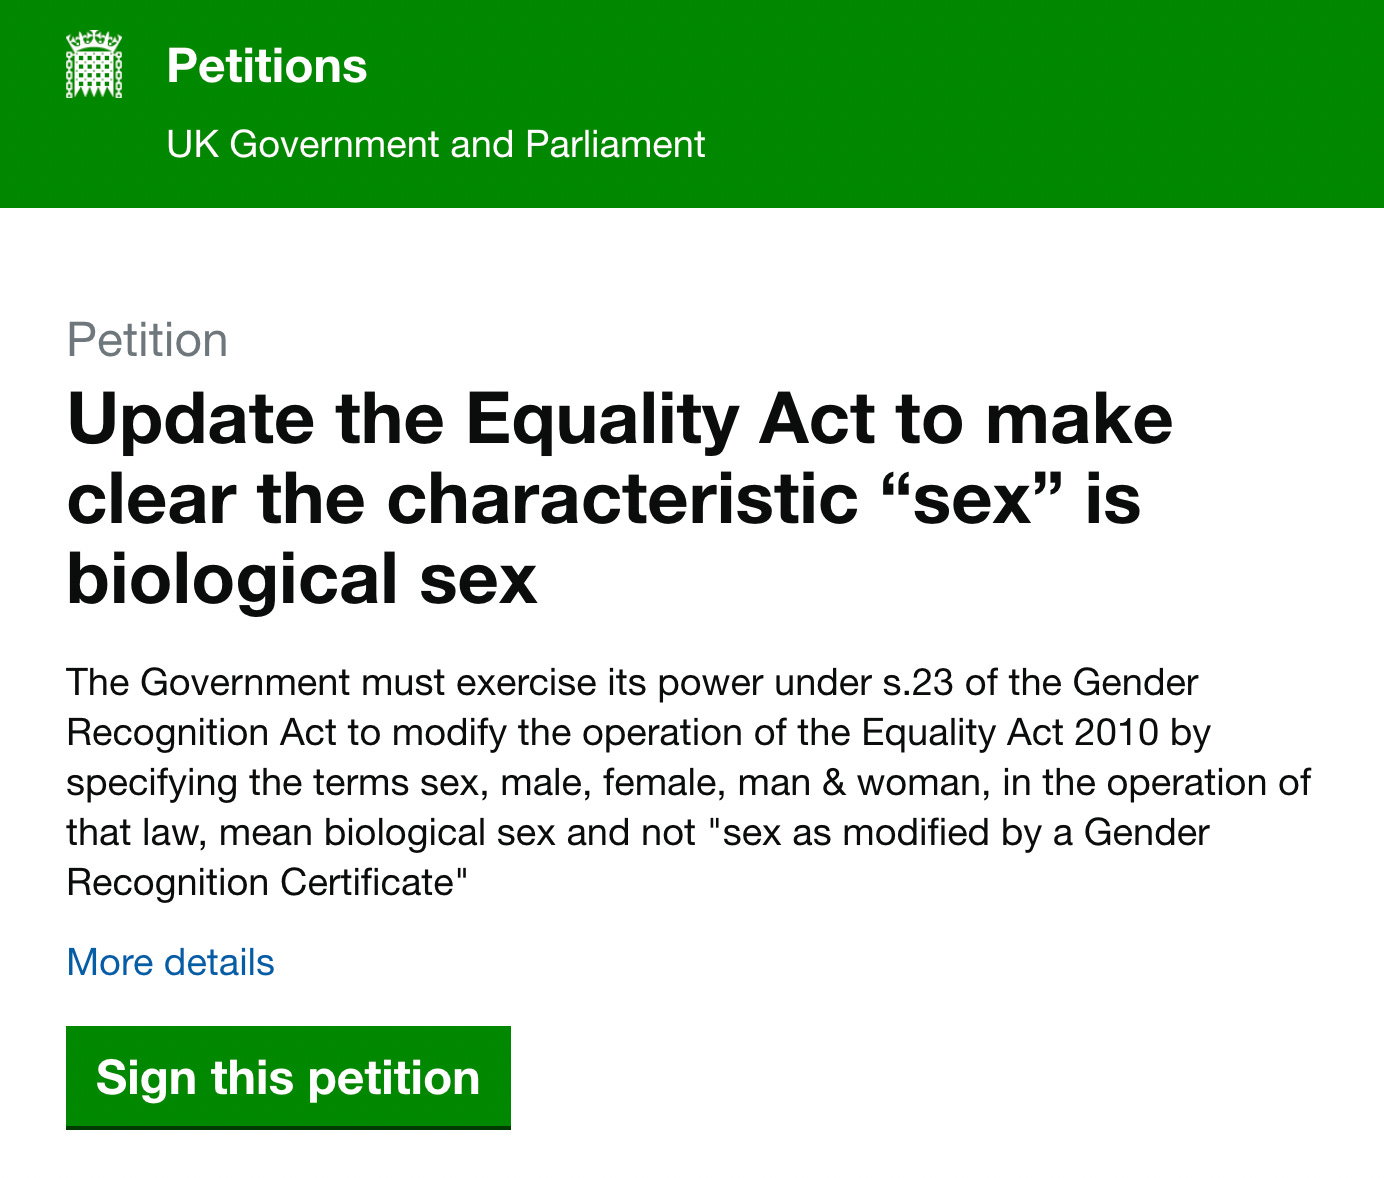 A screenshot of the UK Government and Parliament Petitions website showing the Update the Equality Act petition